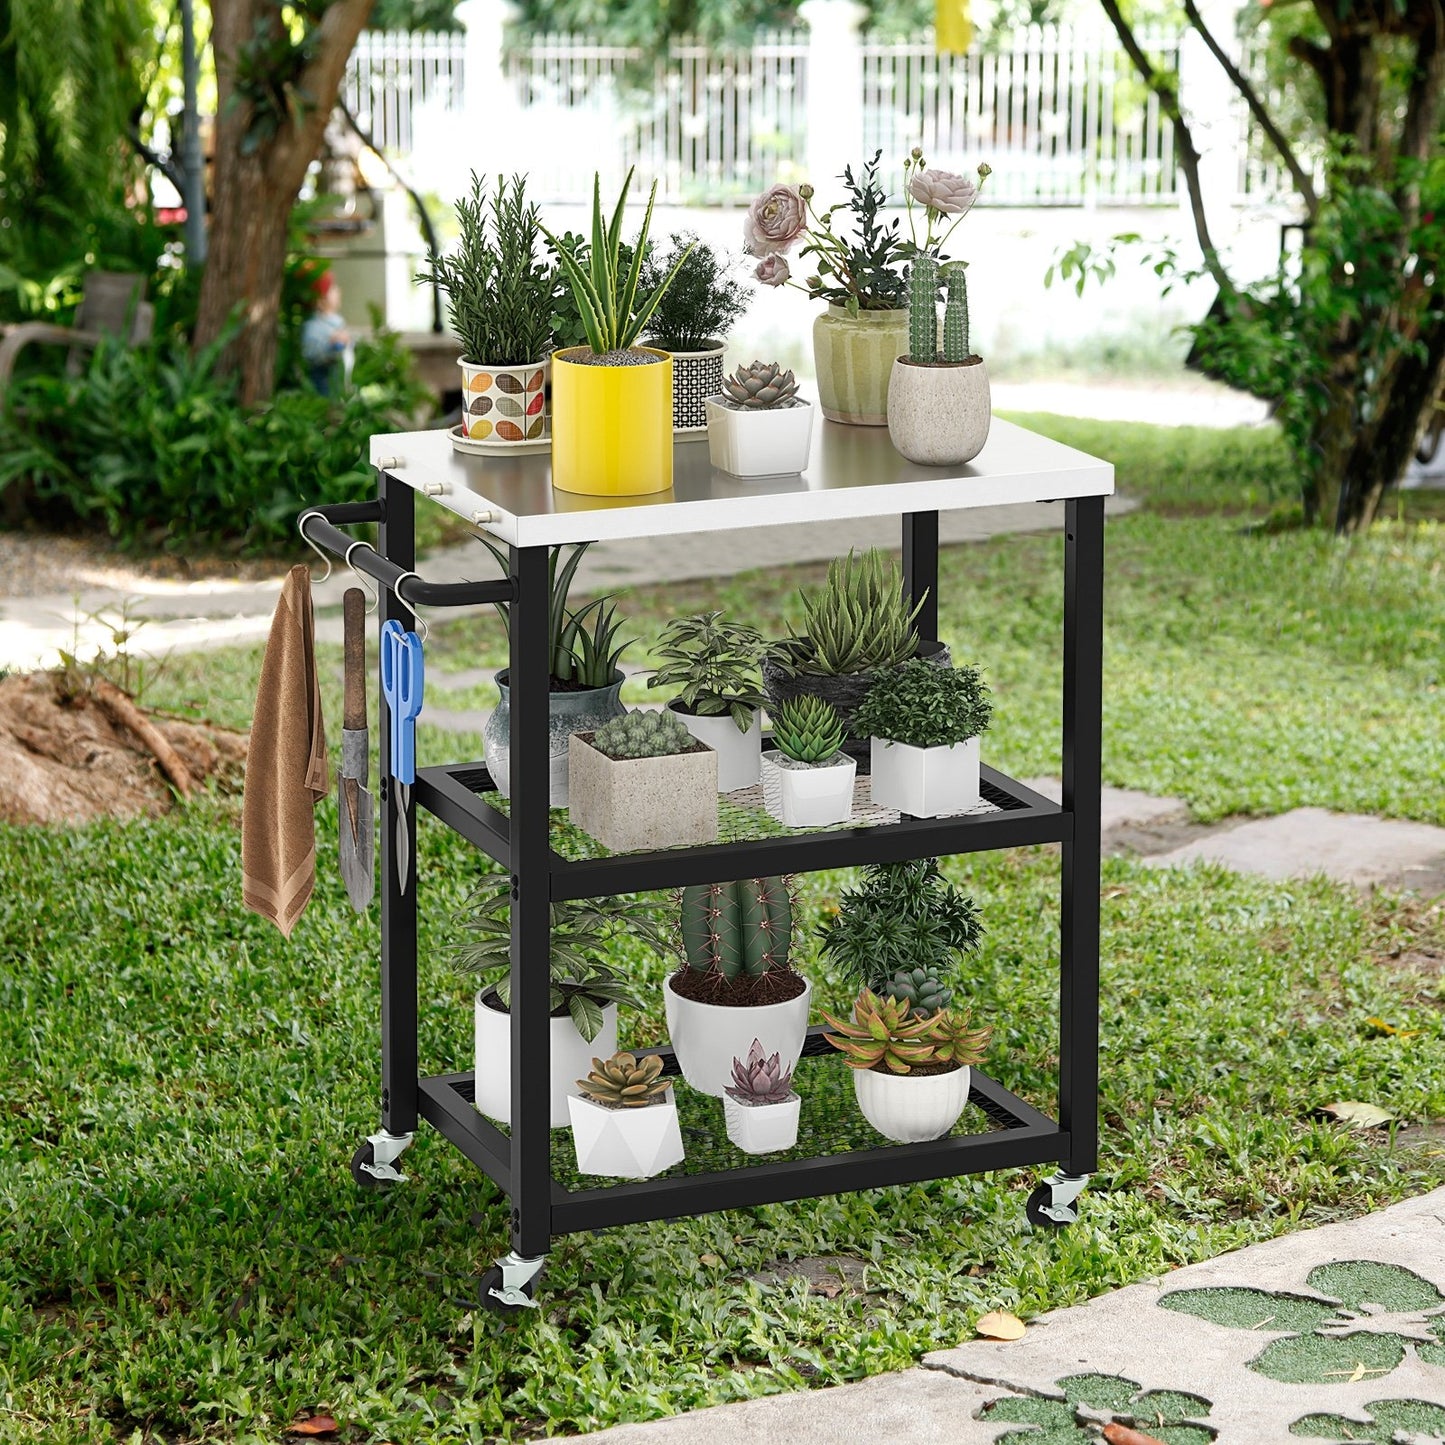 3-Tier Foldable Outdoor Stainless Steel Food Prepare Dining Cart Table on Wheels, Black